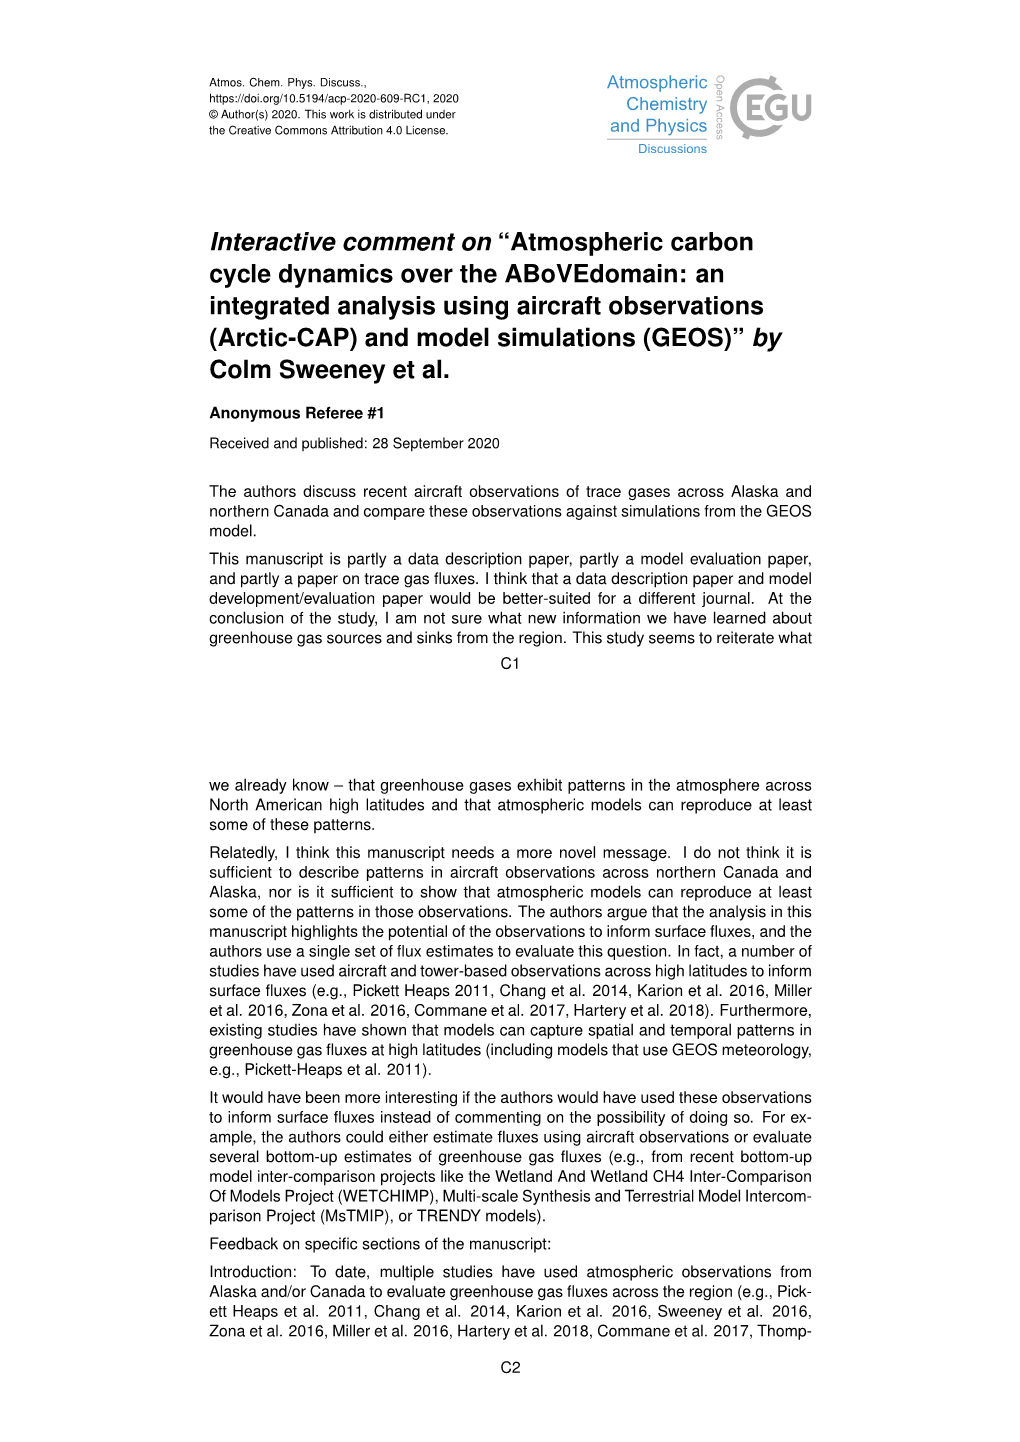 Atmospheric Carbon Cycle Dynamics Over the Abovedomain: an Integrated Analysis Using Aircraft Observat